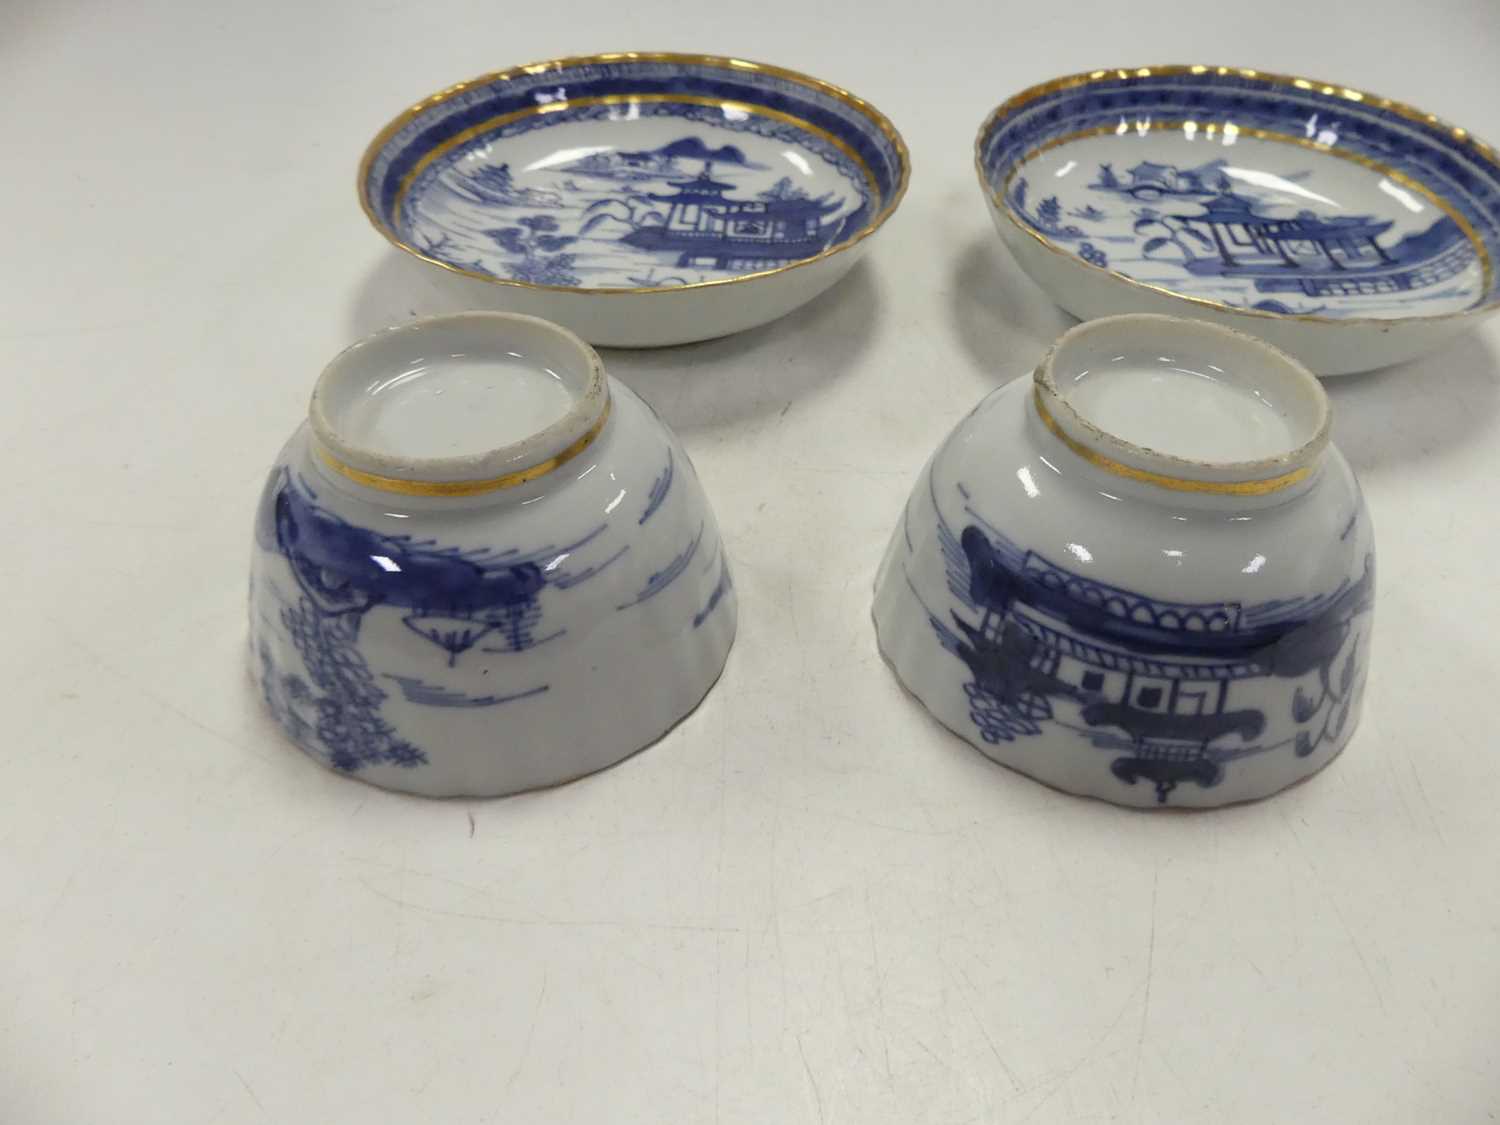 A collection of Asian ceramics, to include blue and white porcelain tea bowls Large bowl is - Image 8 of 9